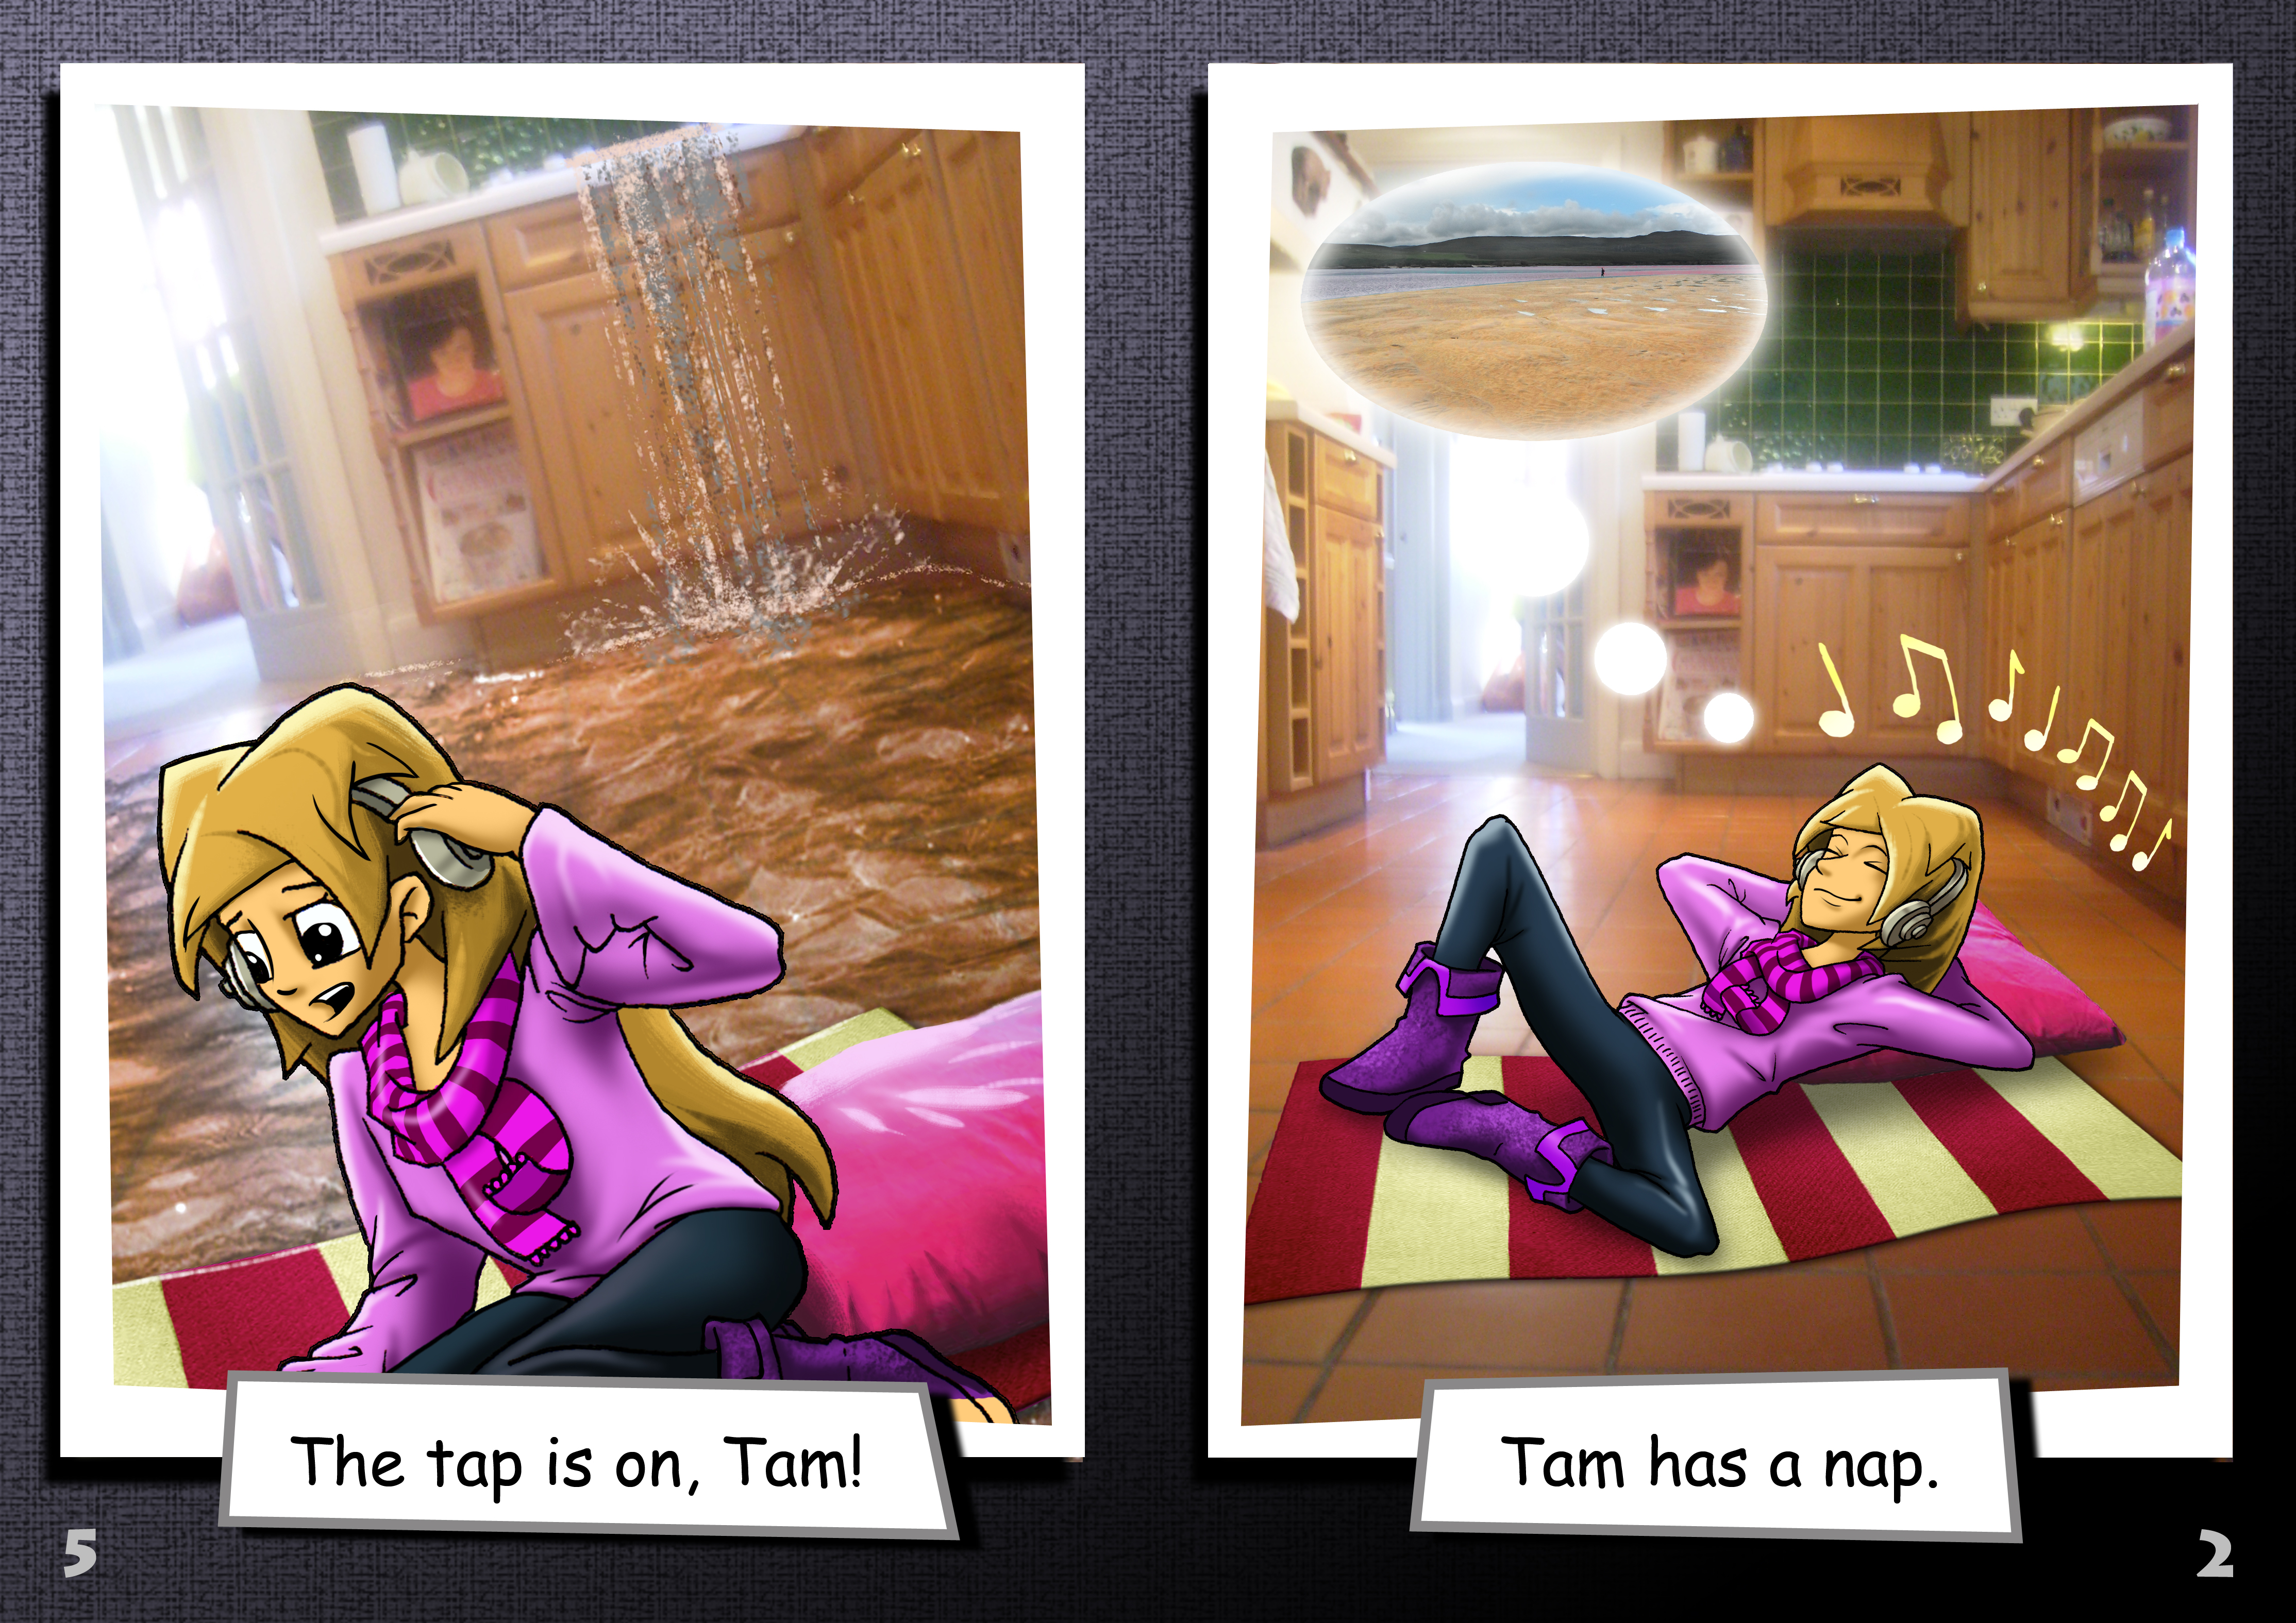 Tam has a Nap pages 2 and 5